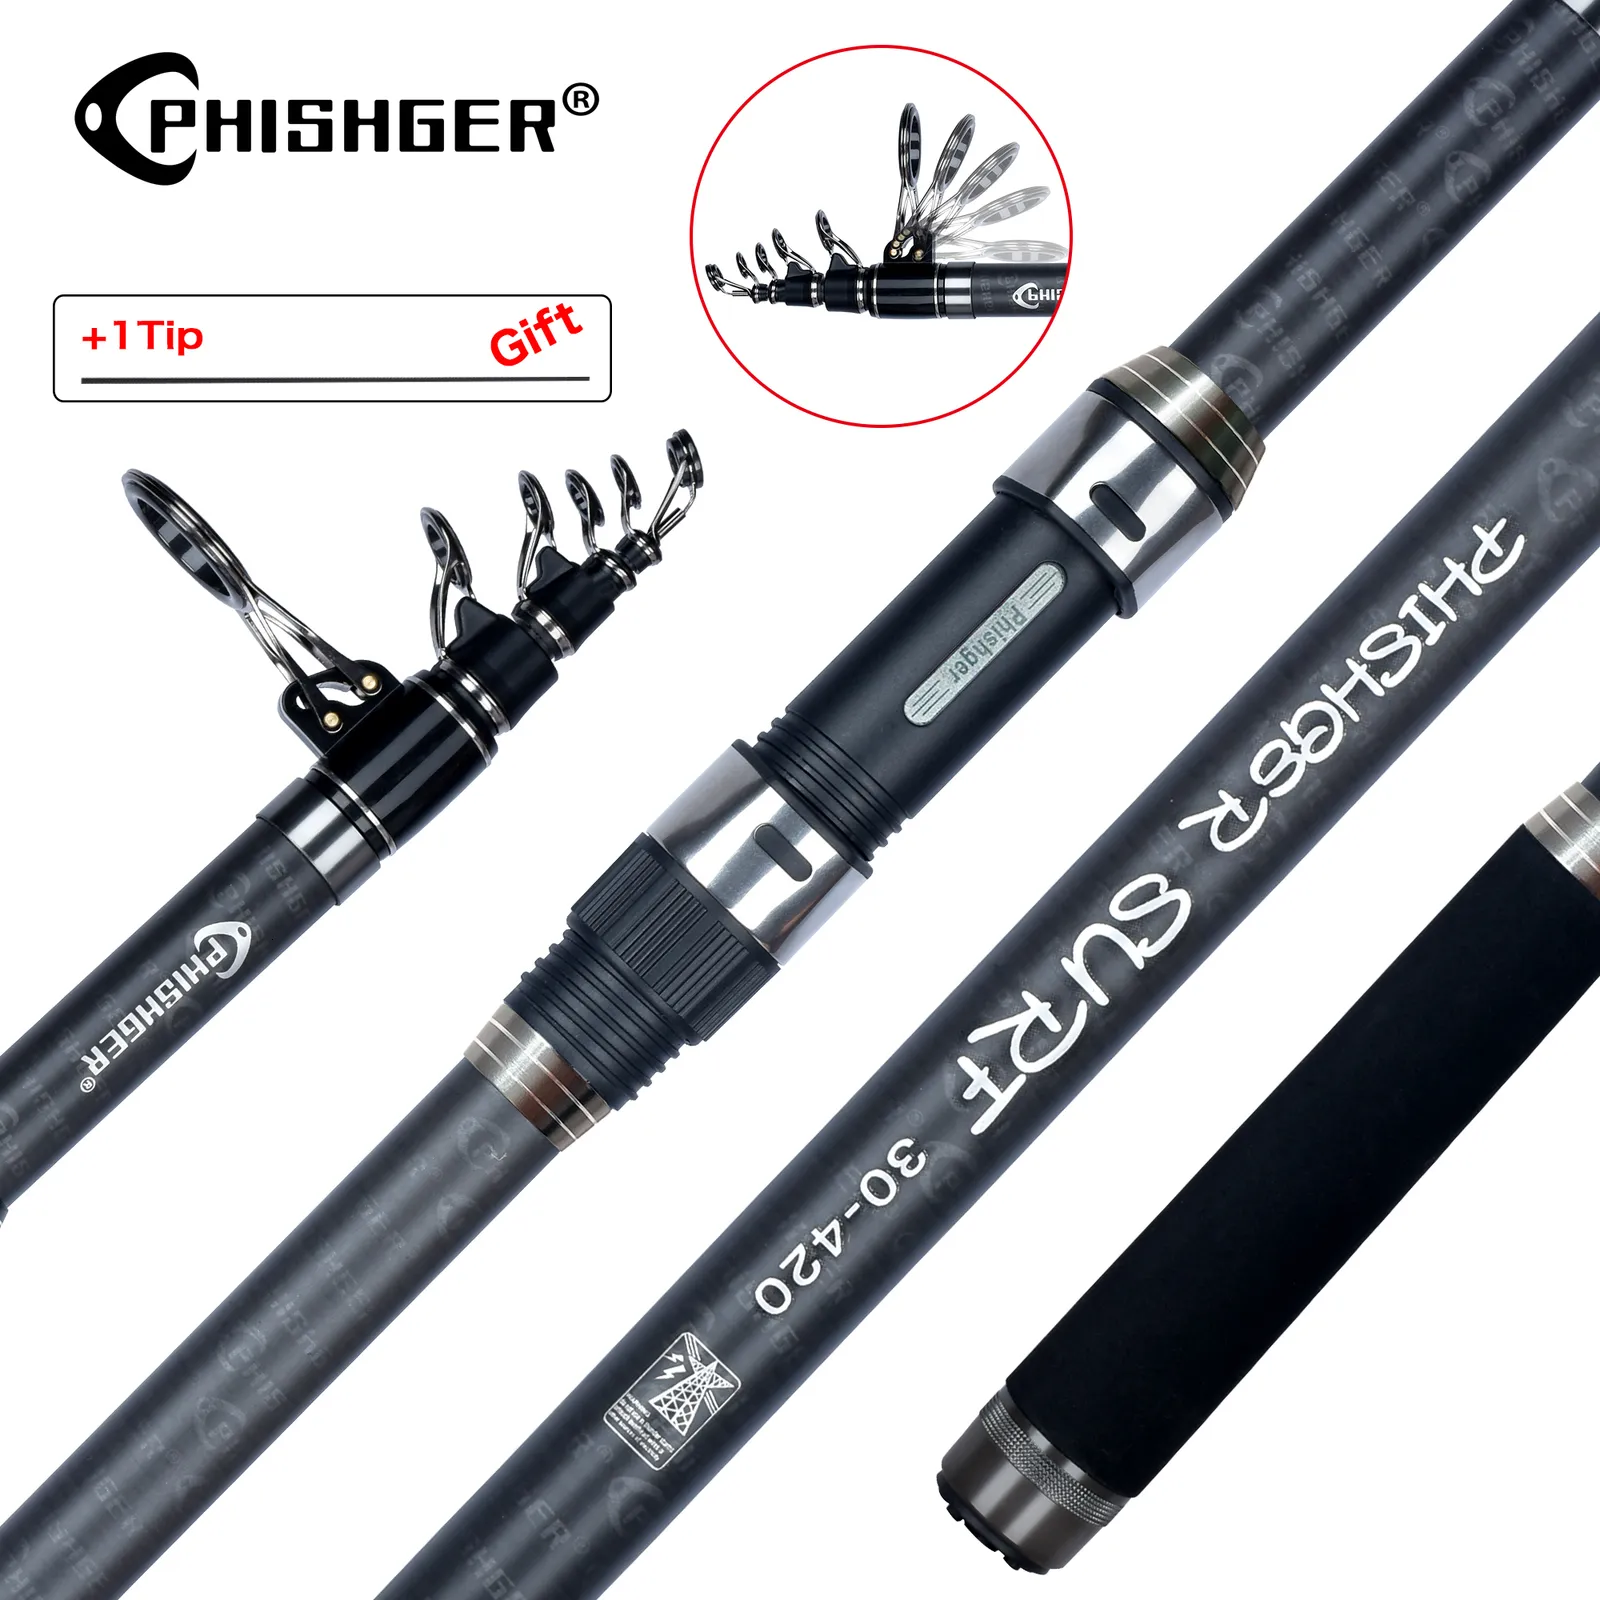 Boat Fishing Rods PHISHGER Telescopic Surf Spinning Rod  3.6/4.2/4.5/5.0/5.3m Power80-150g 30T Carbon Travel Surfcasting Shore  Casting Fishing Pole